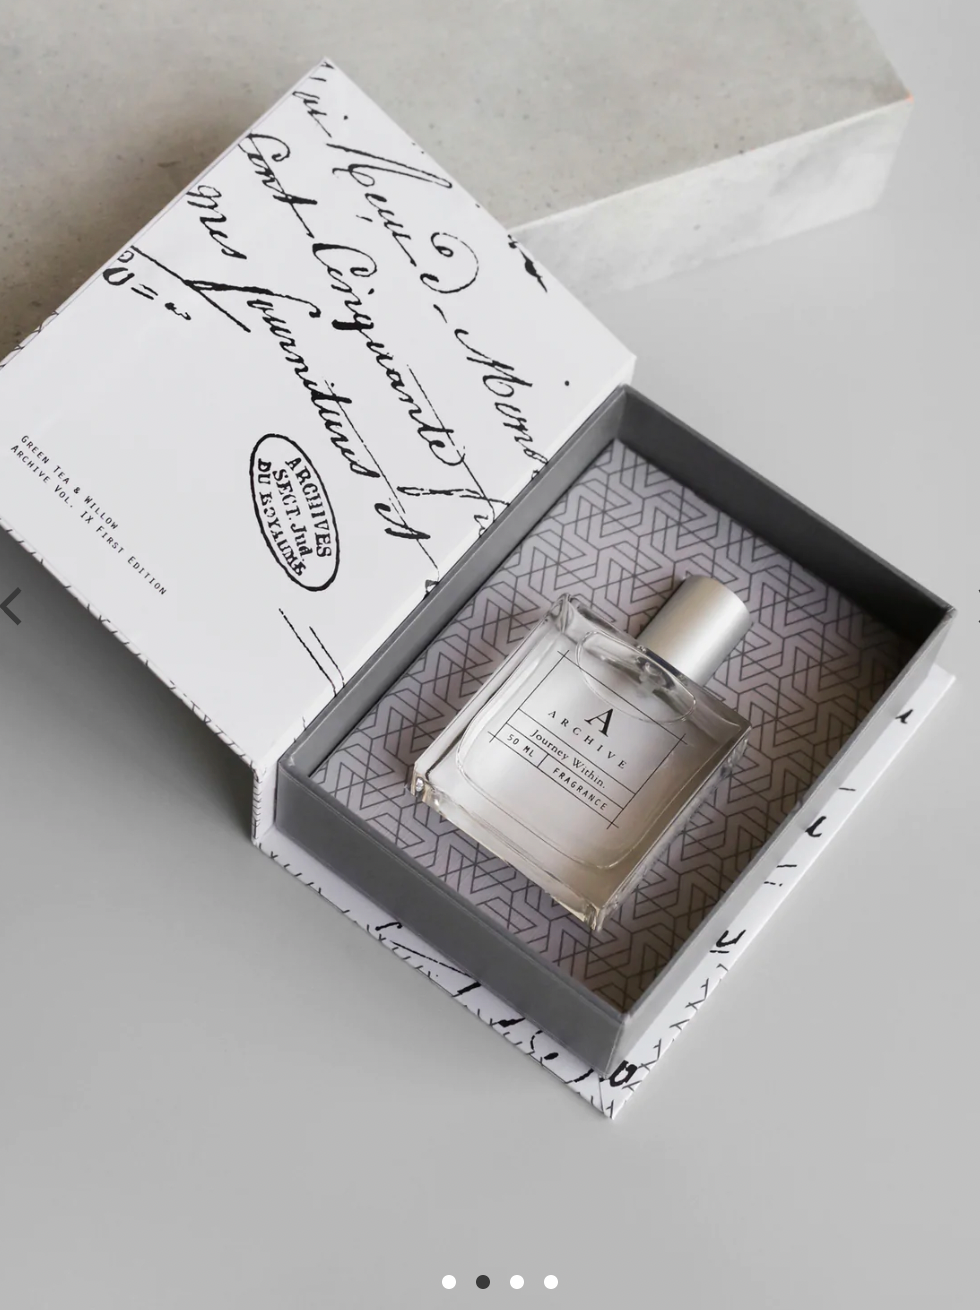 Archive Fragrance Journey Within 50 ml